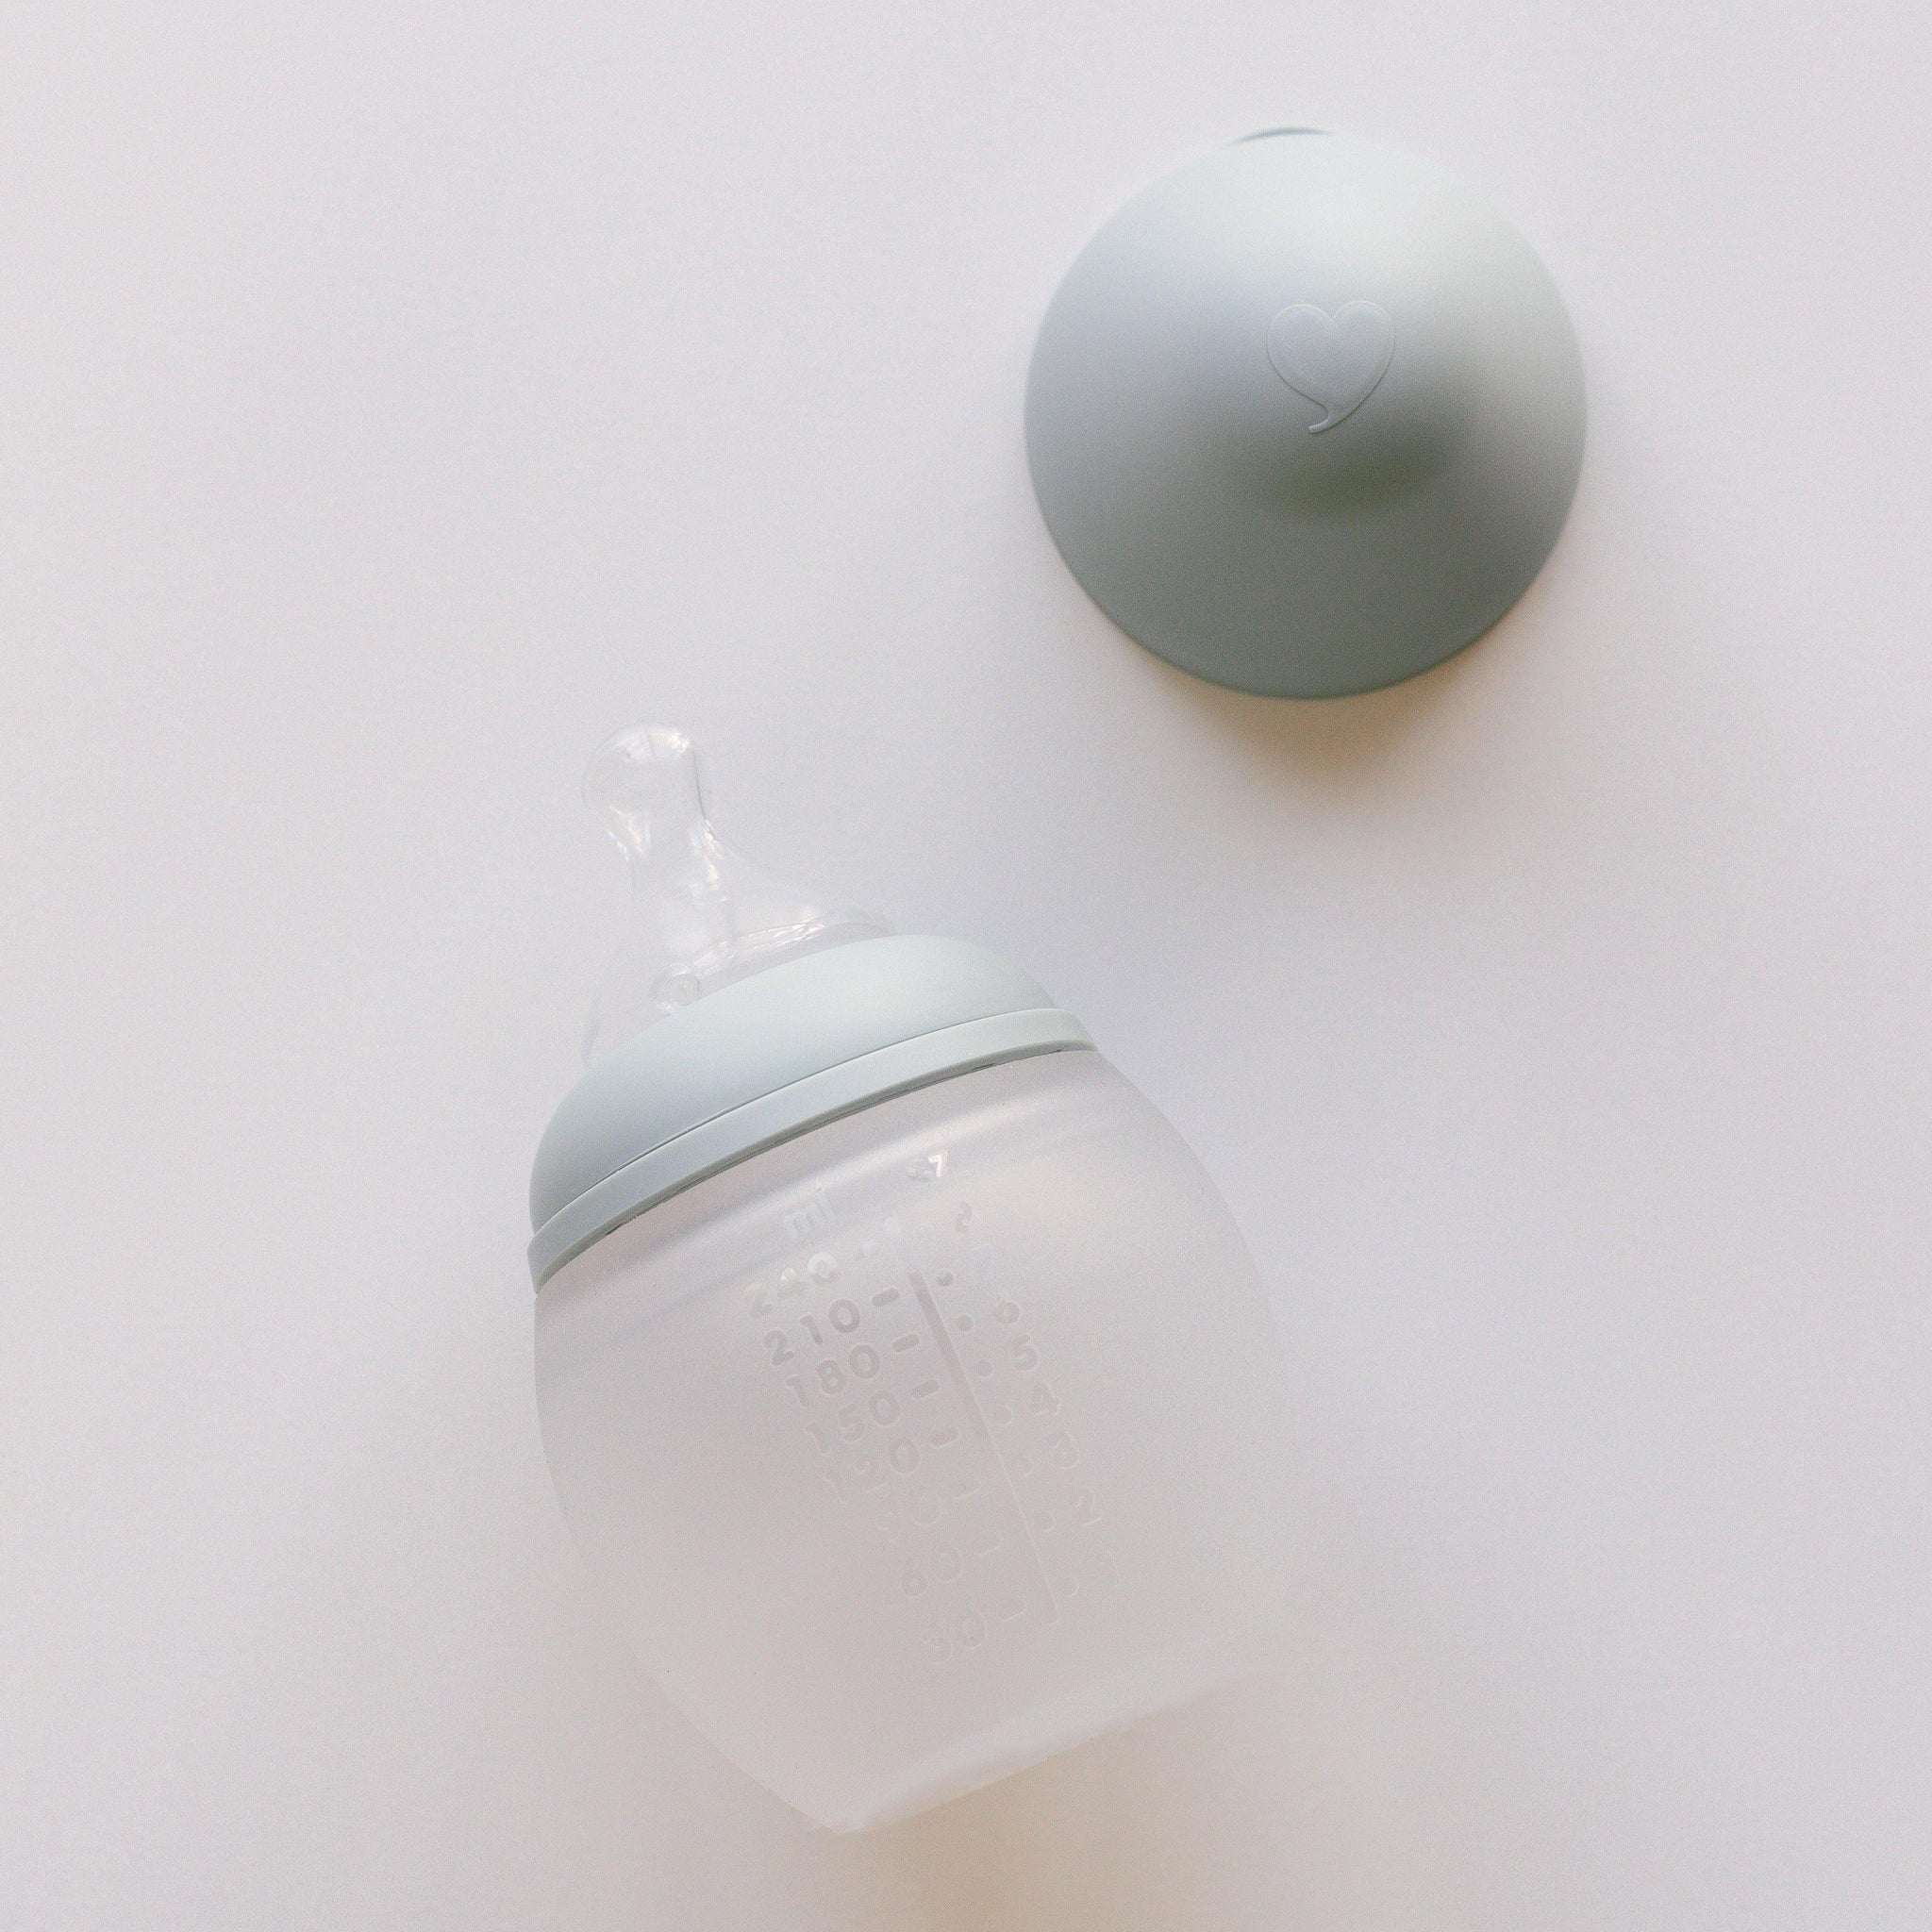 BibRond Élhée is made of pure silicone, of new generation medical quality, and doesn’t contain bisphenol A (BPA), bisphenol S (BPS) or any other substance likely to harm the health of babies.